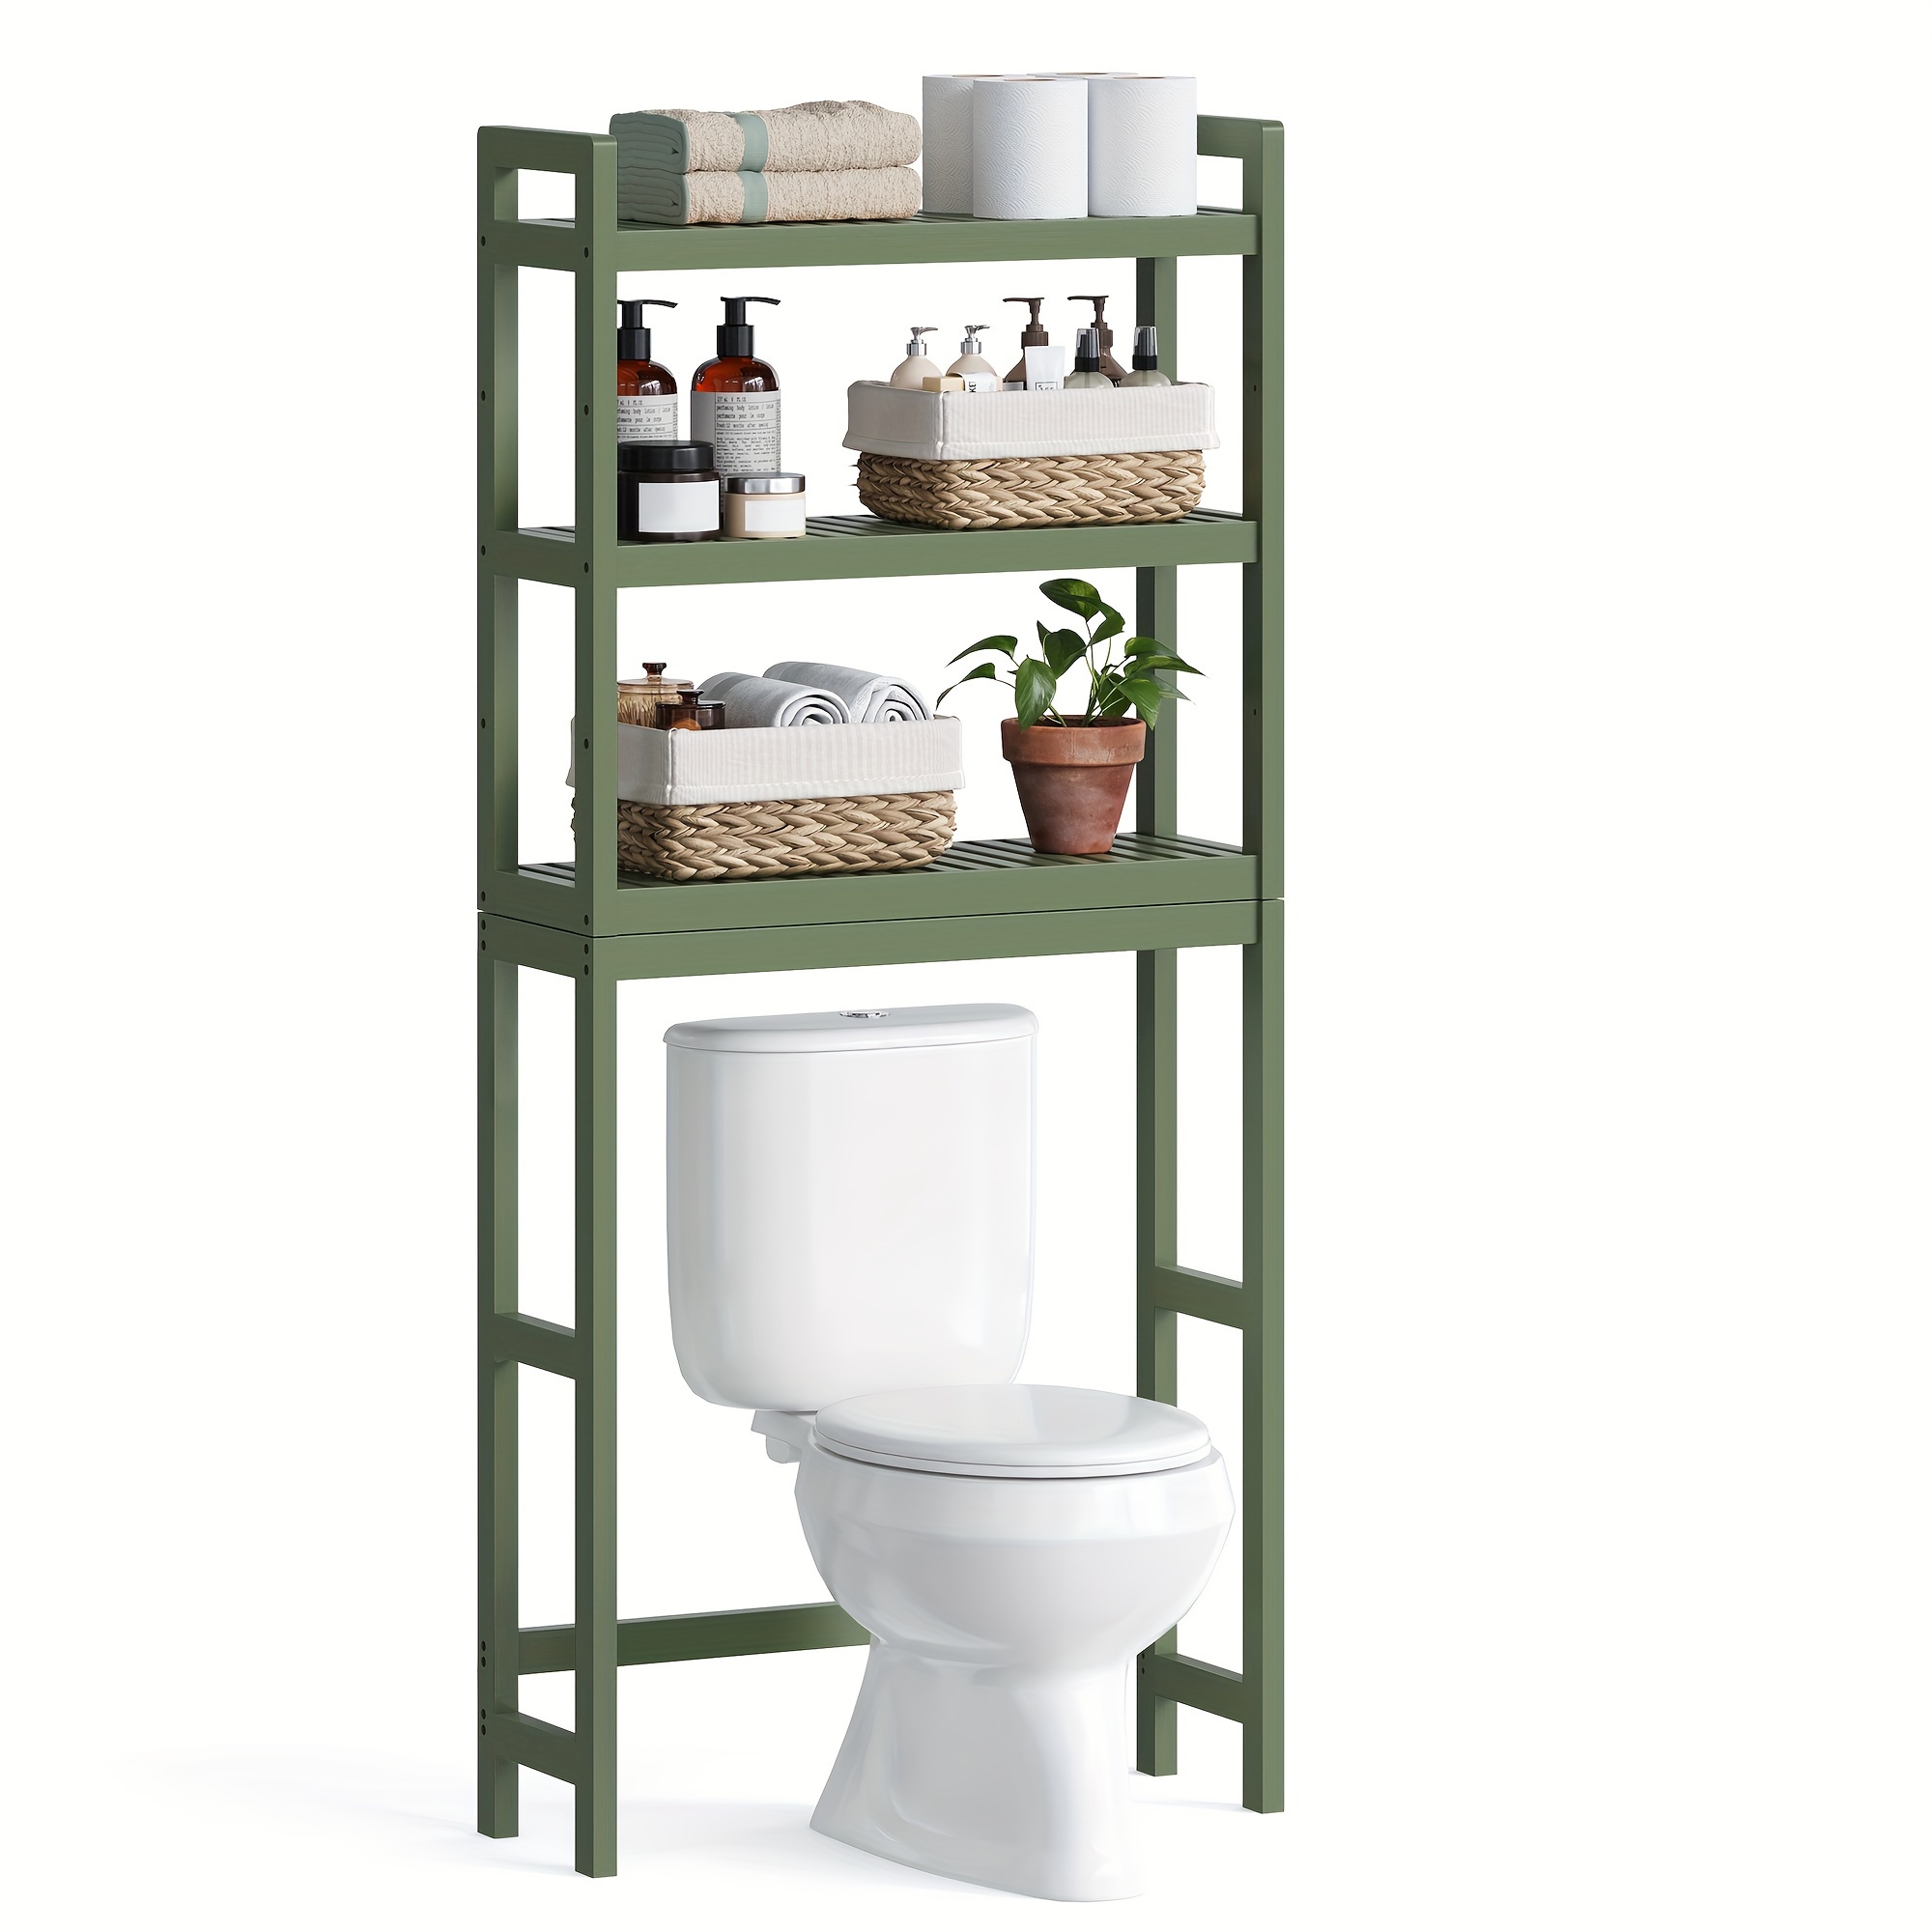 

Songmics Over The Toilet Storage, 3-tier Bamboo Over Toilet Bathroom Organizer With Adjustable Shelf, Fit Most Toilets, Space-saving, Easy Assembly